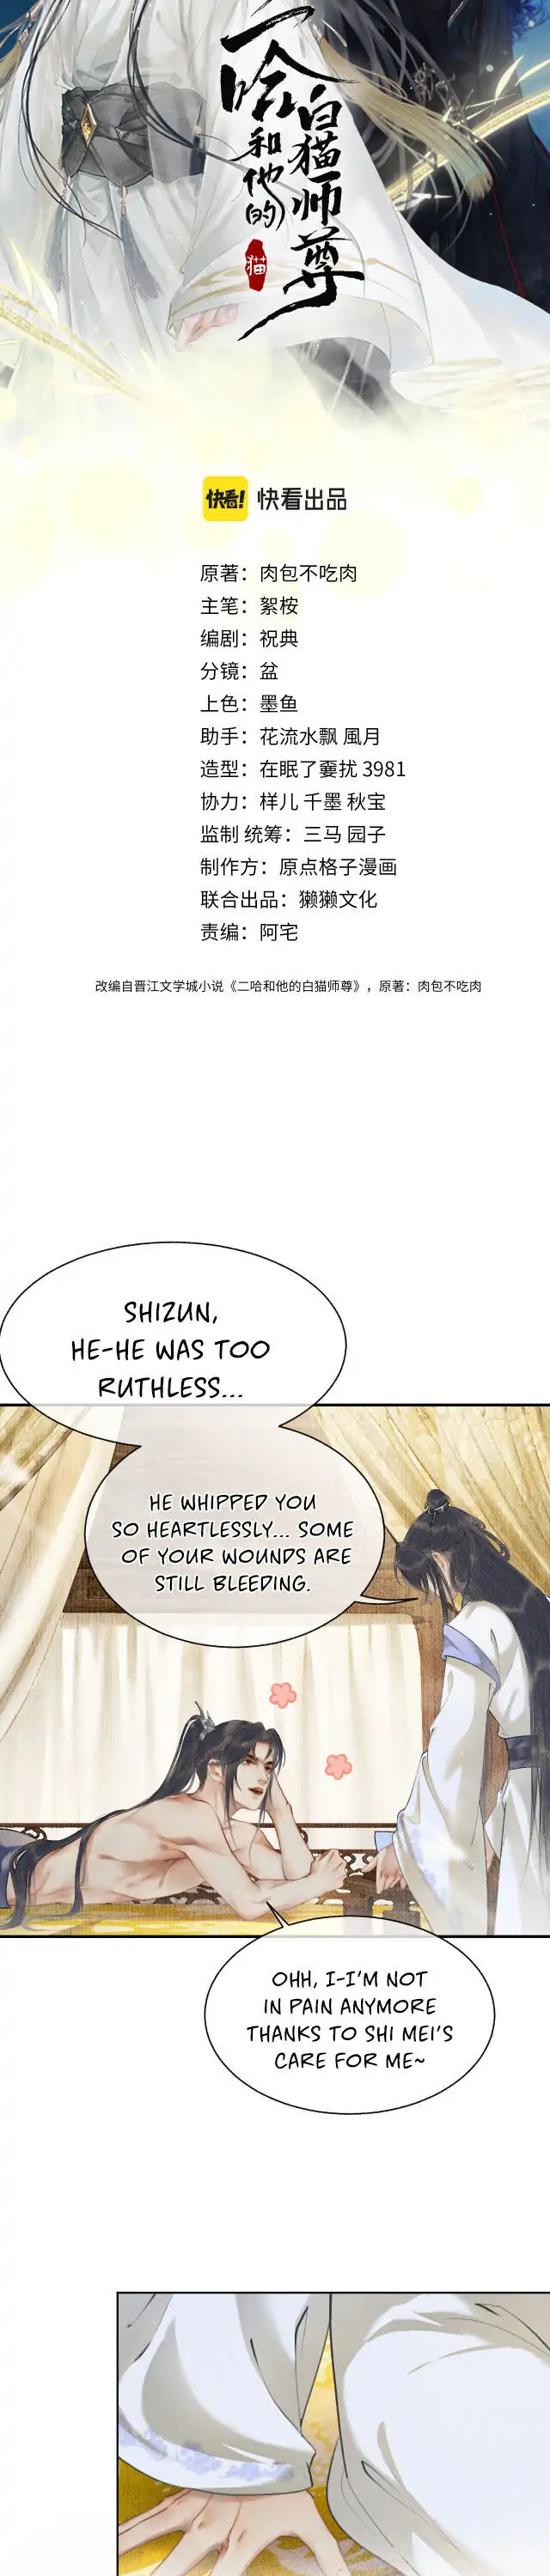 The Husky And His White Cat Shizun - Page 2